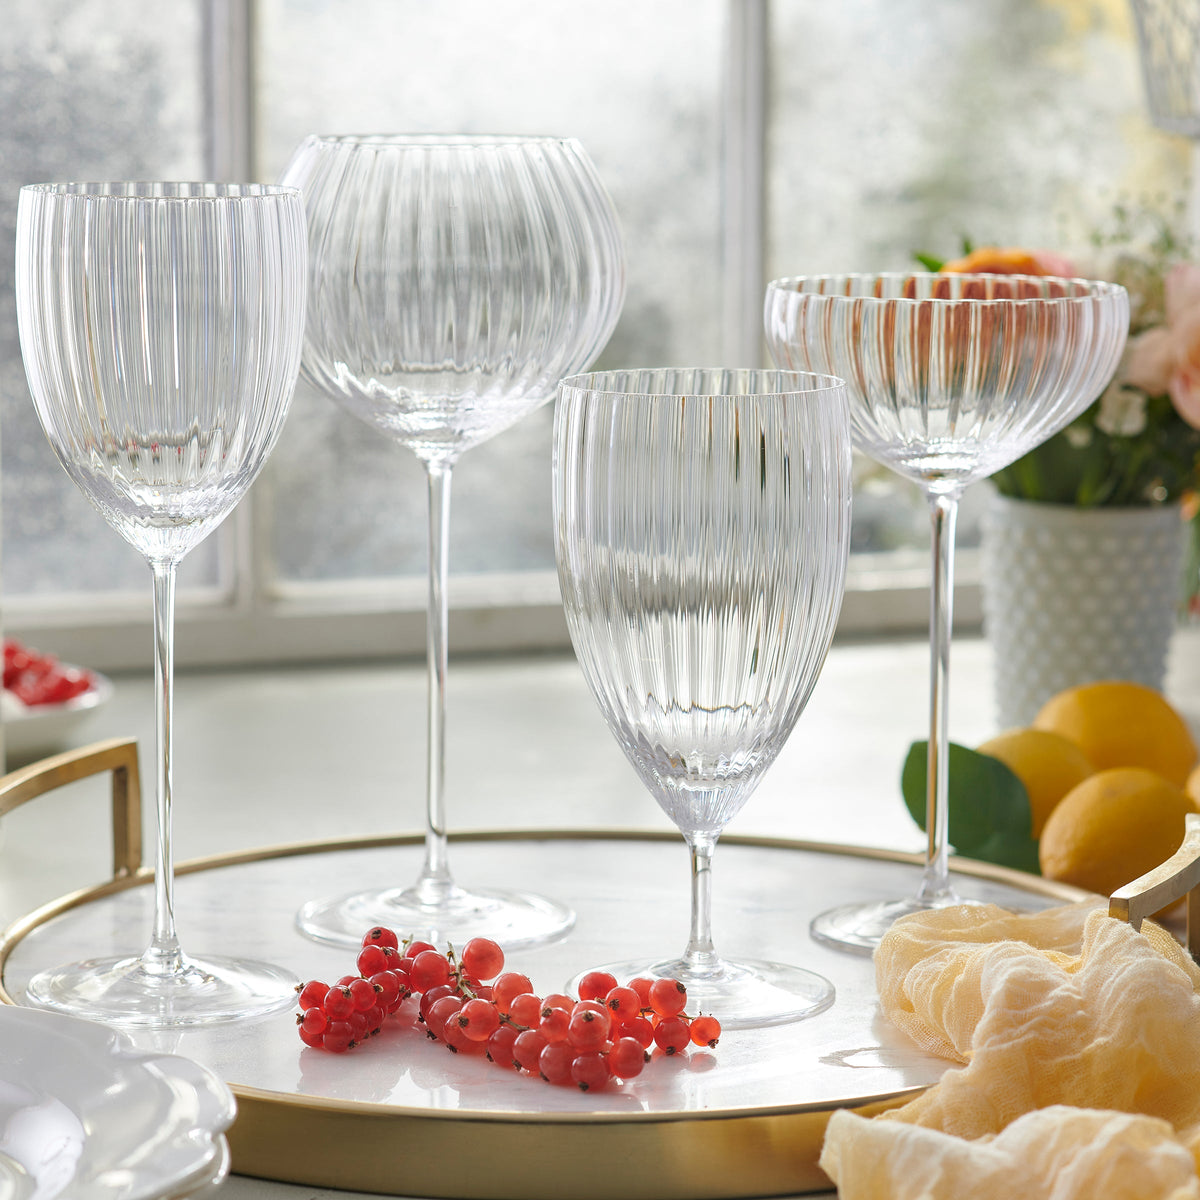 A set of Quinn Clear White Wine Glasses by Caskata Artisanal Home on a tray.